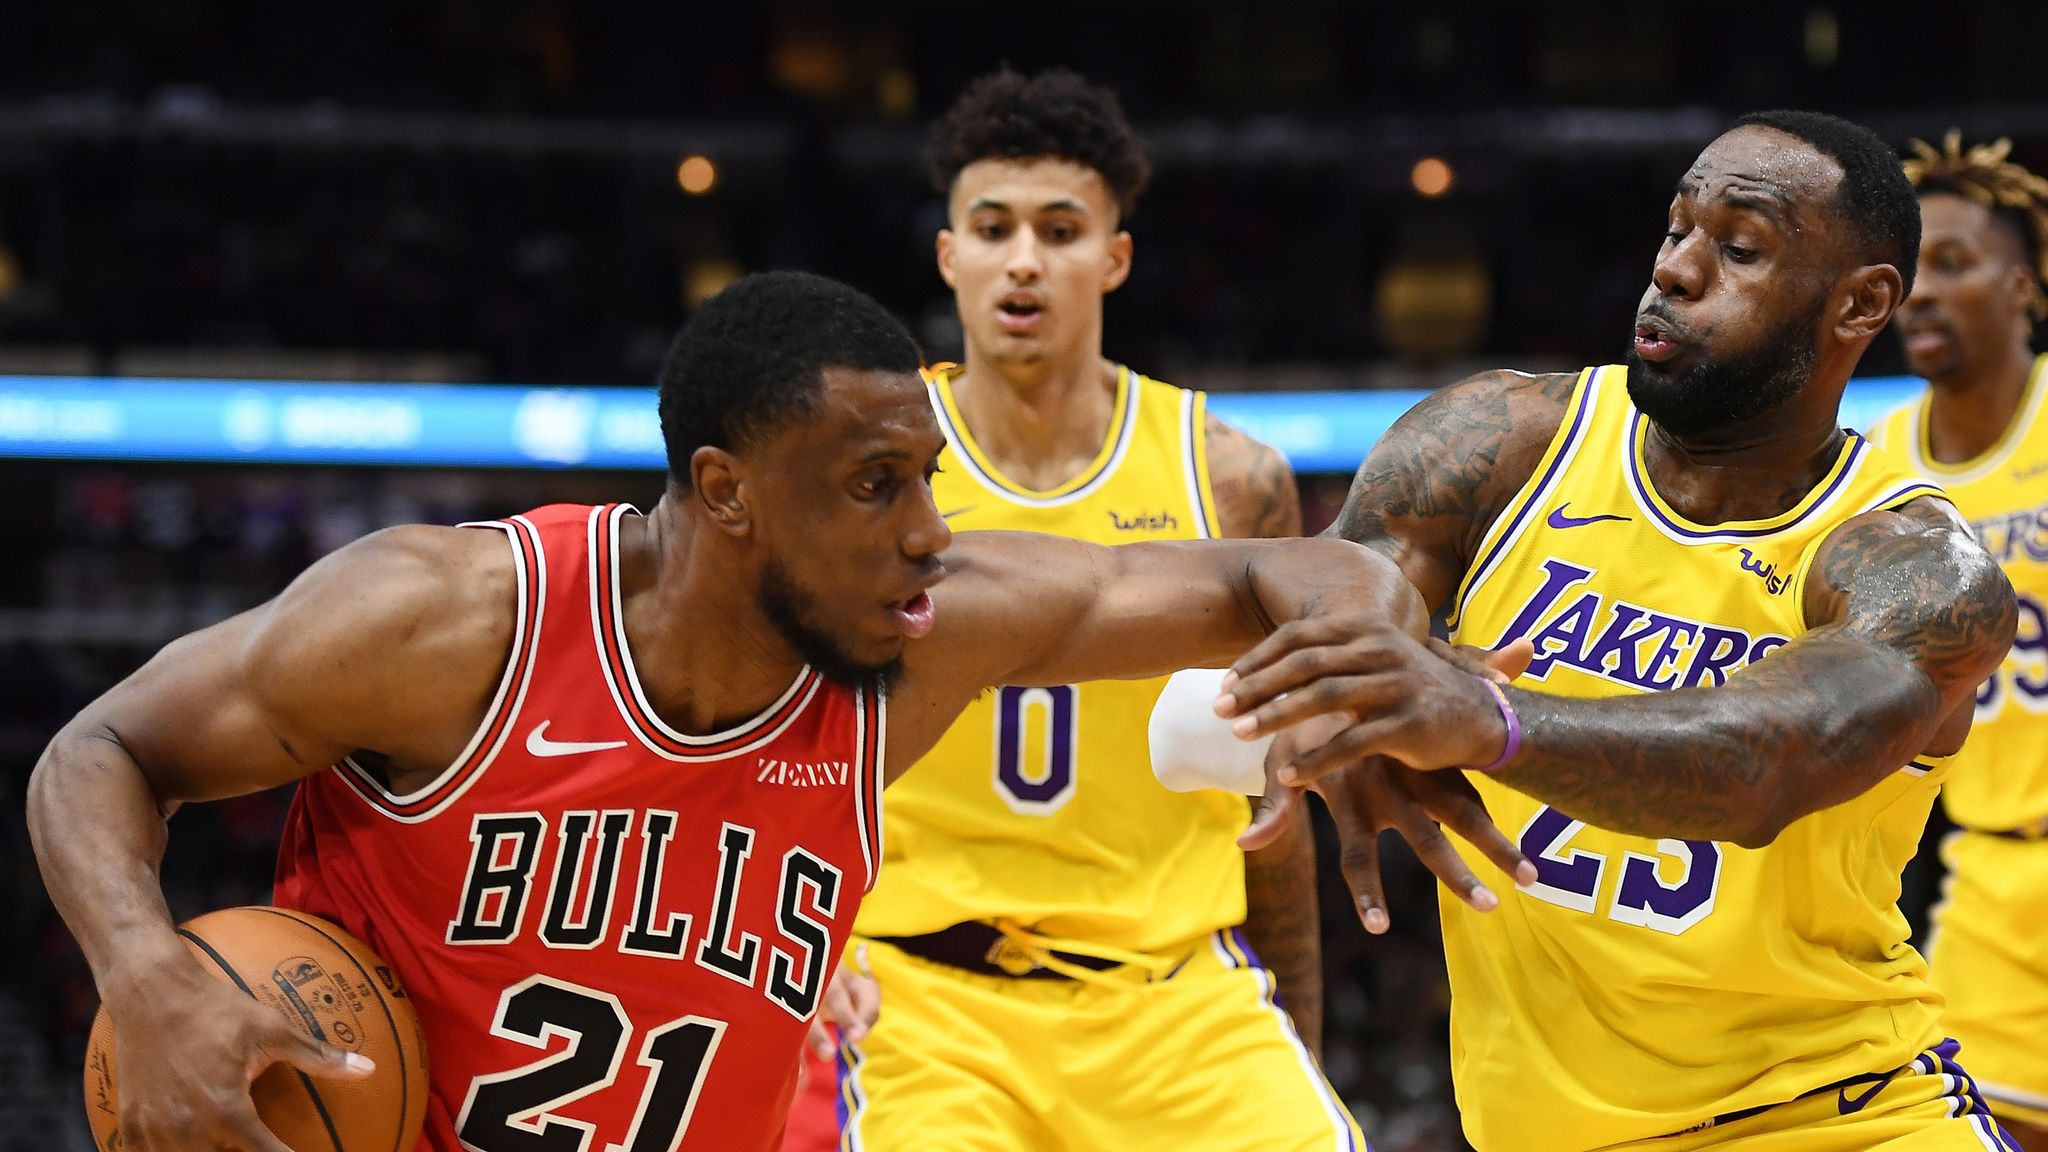 Flipboard: LeBron James praises bench players after Lakers rally to beat Bulls